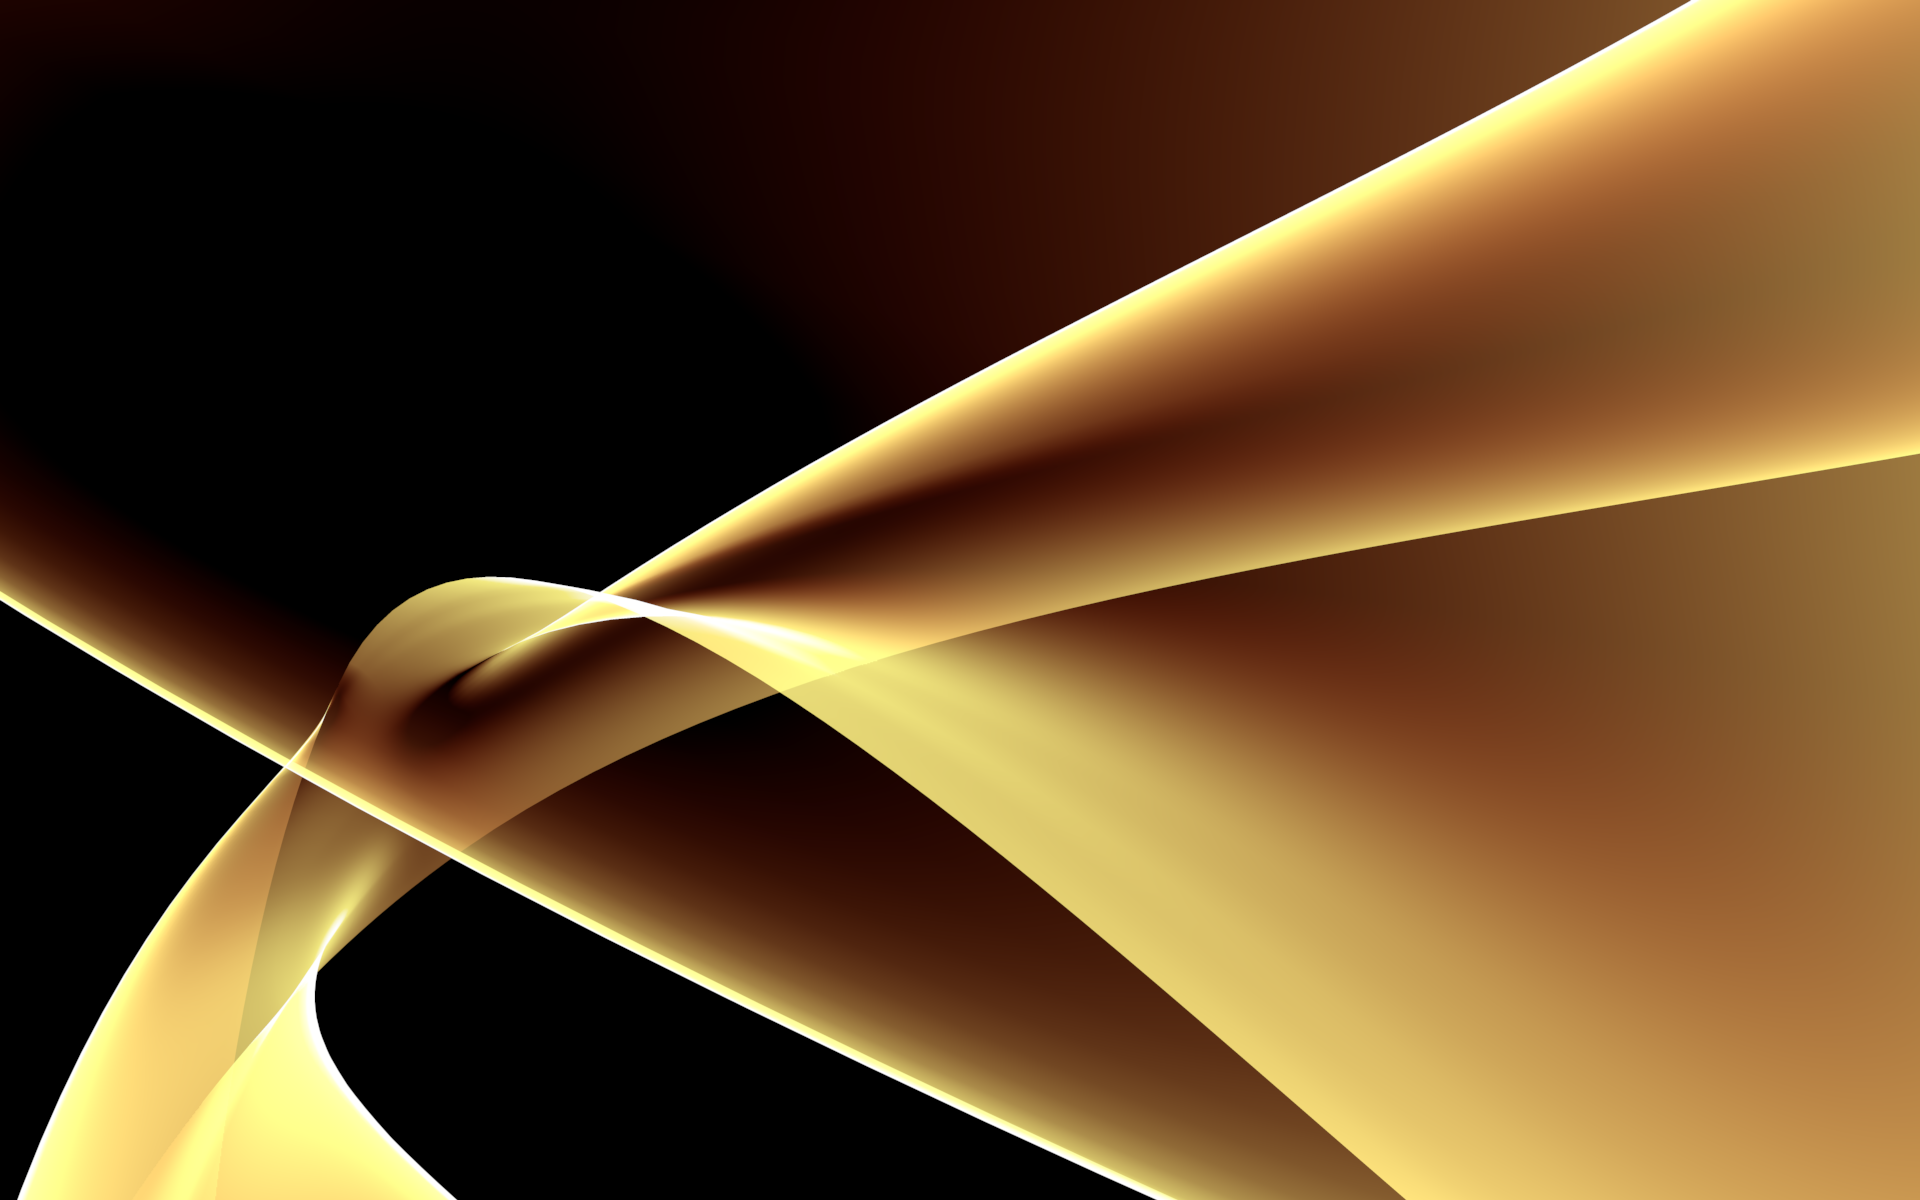 Black and Gold Abstract Desktop Wallpaper 61411 1920x1200 1920x1200